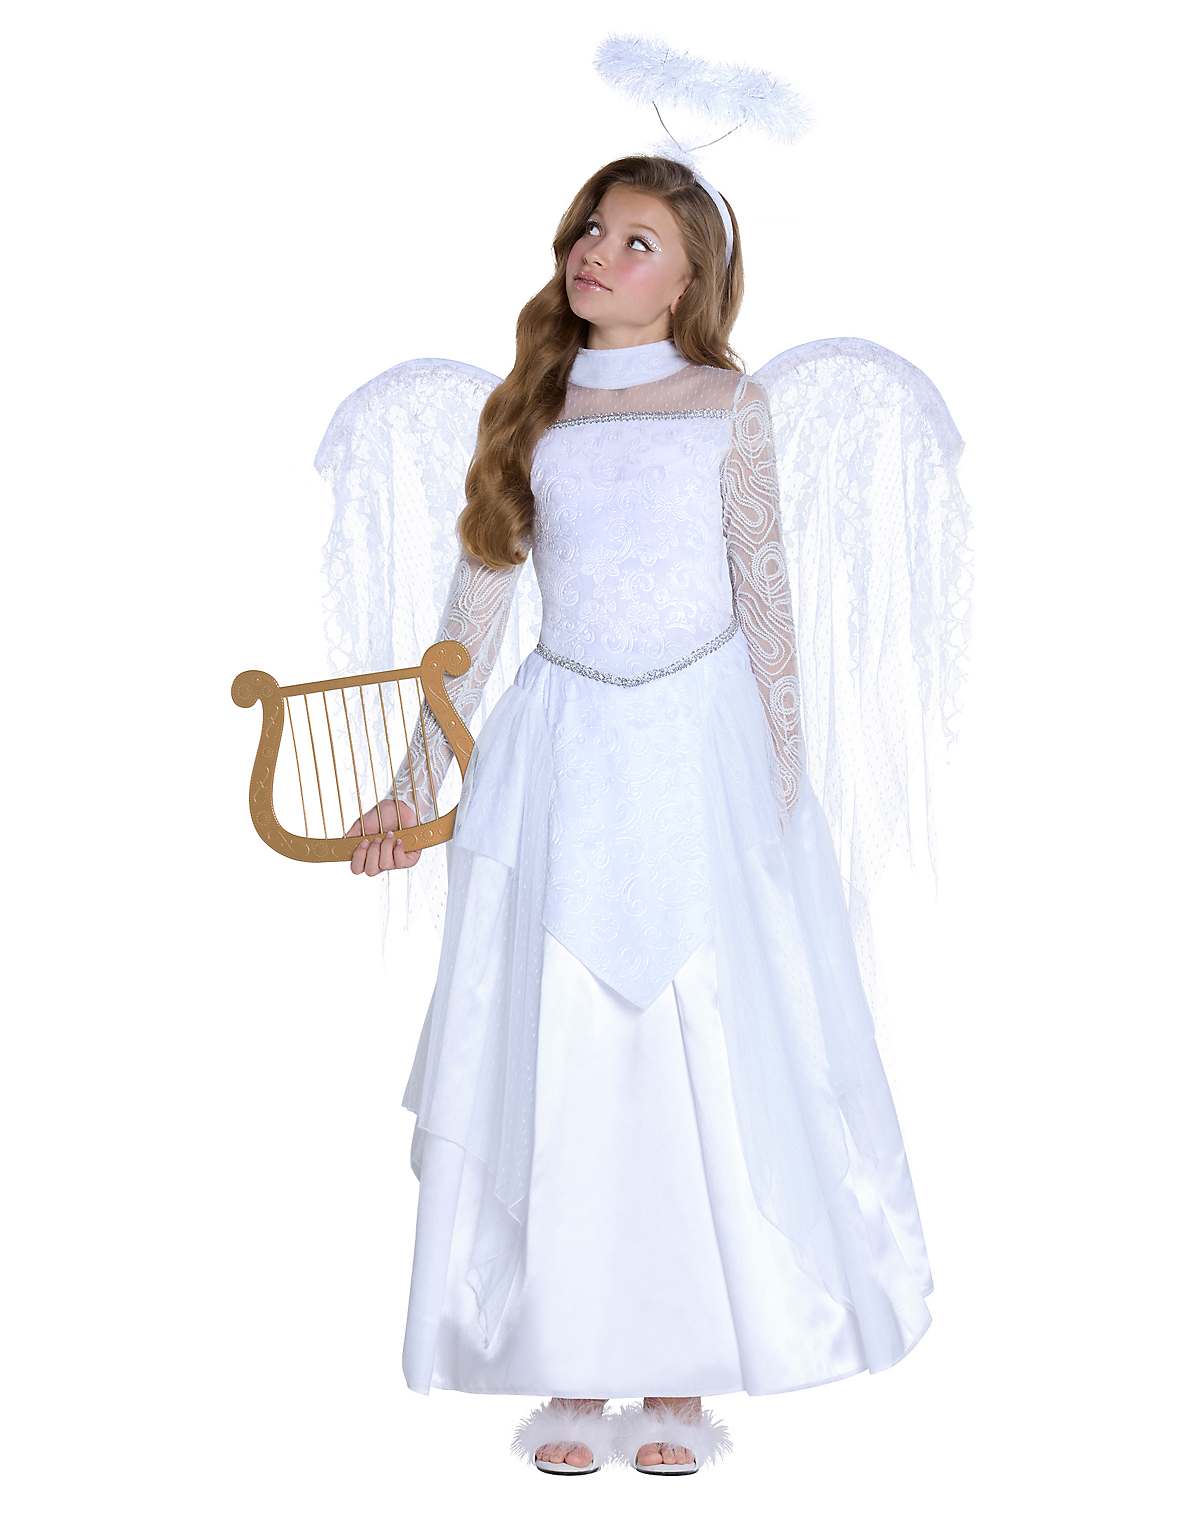 Kids Angel Costume - The Signature Collection